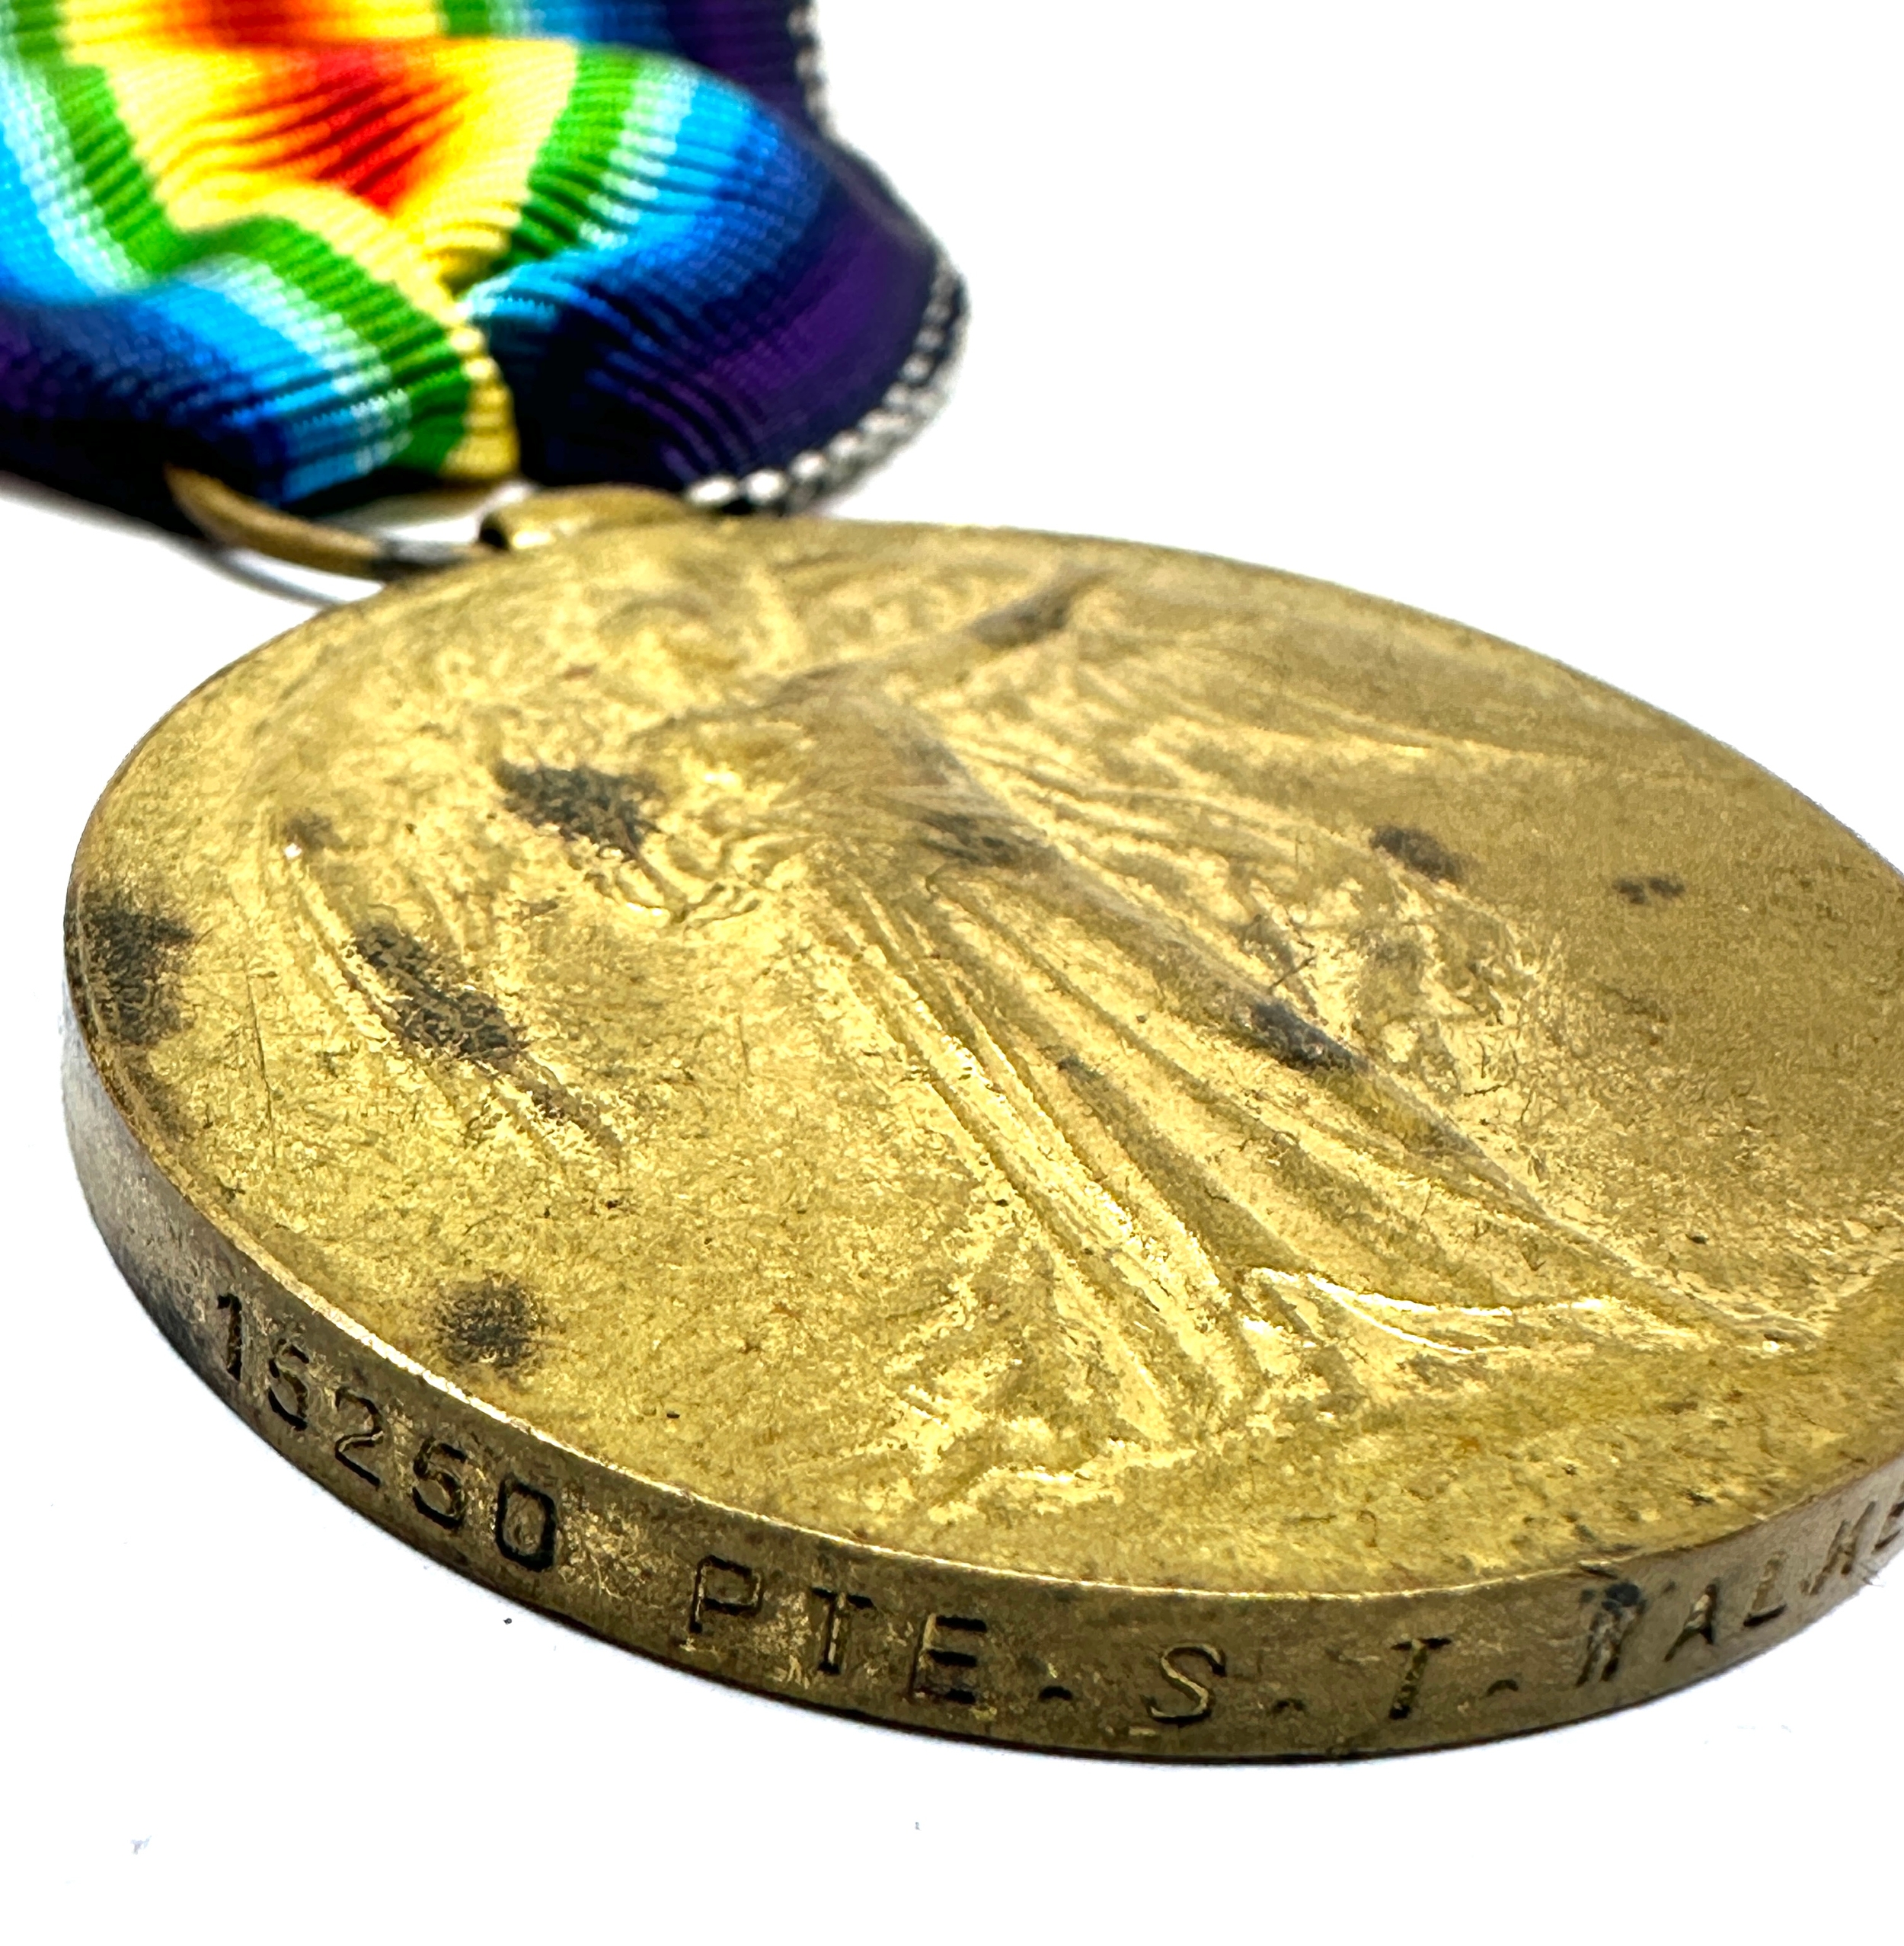 3 ww1 medals names in images 1 erased un-named - Image 5 of 6